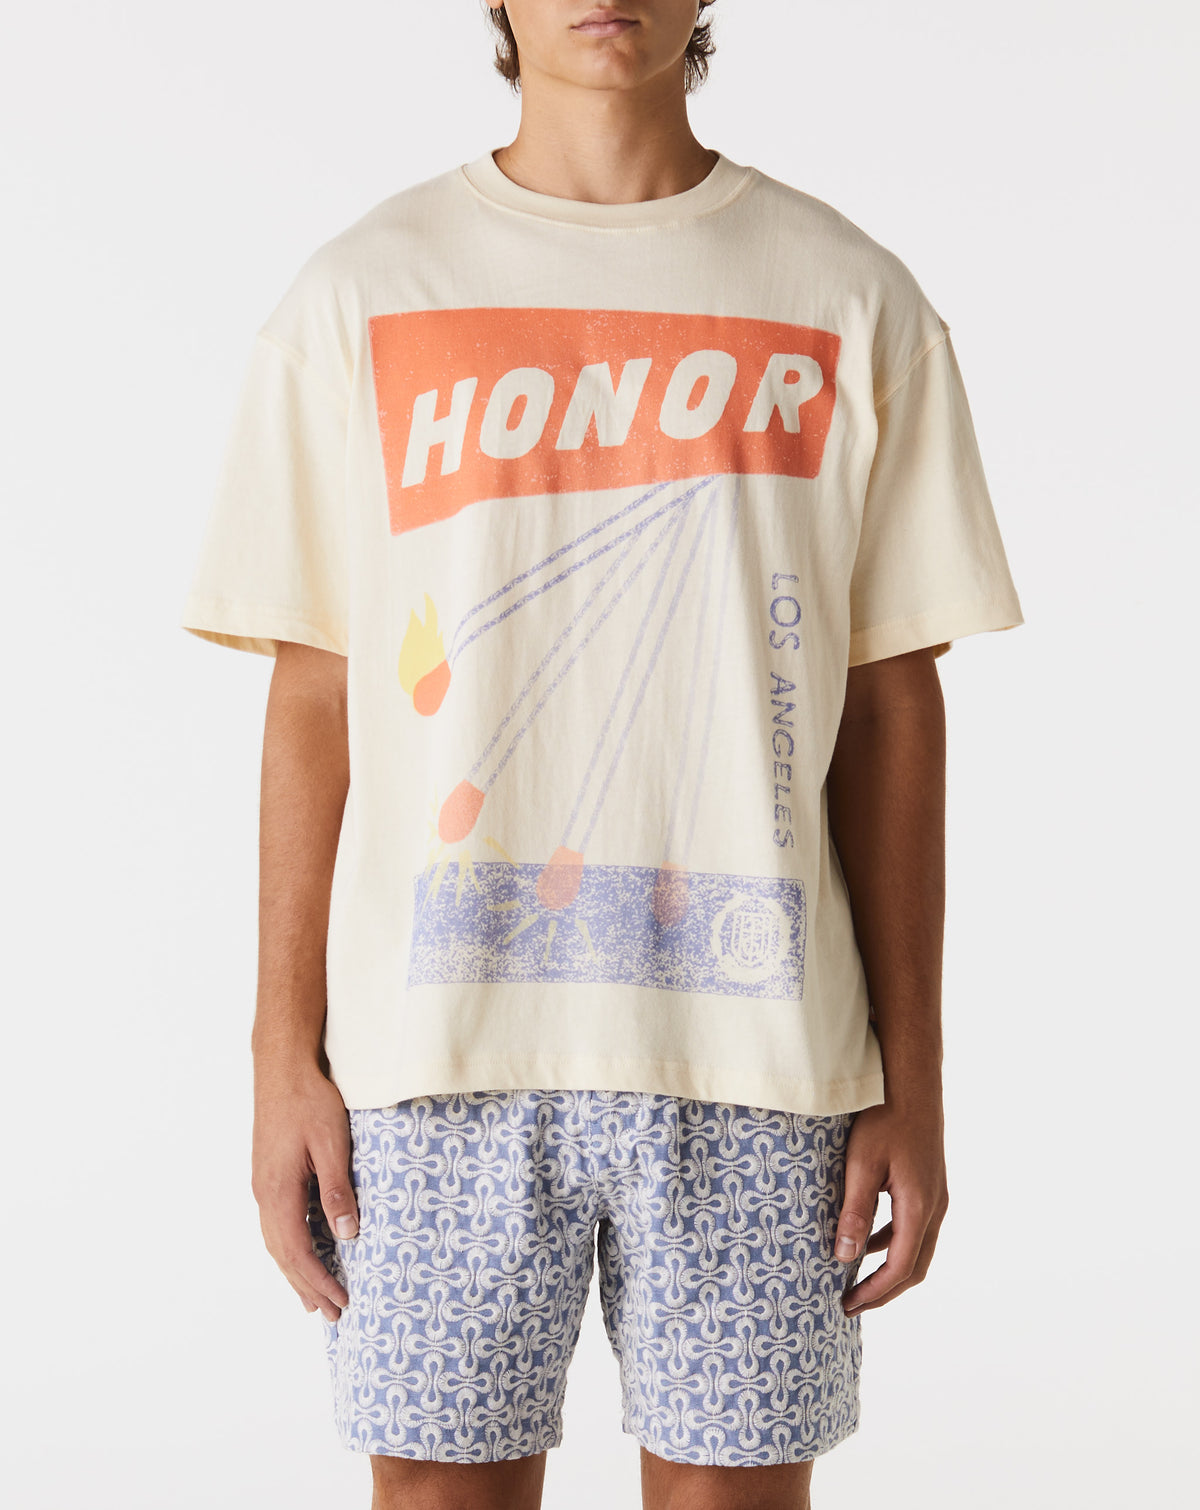 Honor The Gift Htg Match Box T-Shirt - Rule of Next Apparel